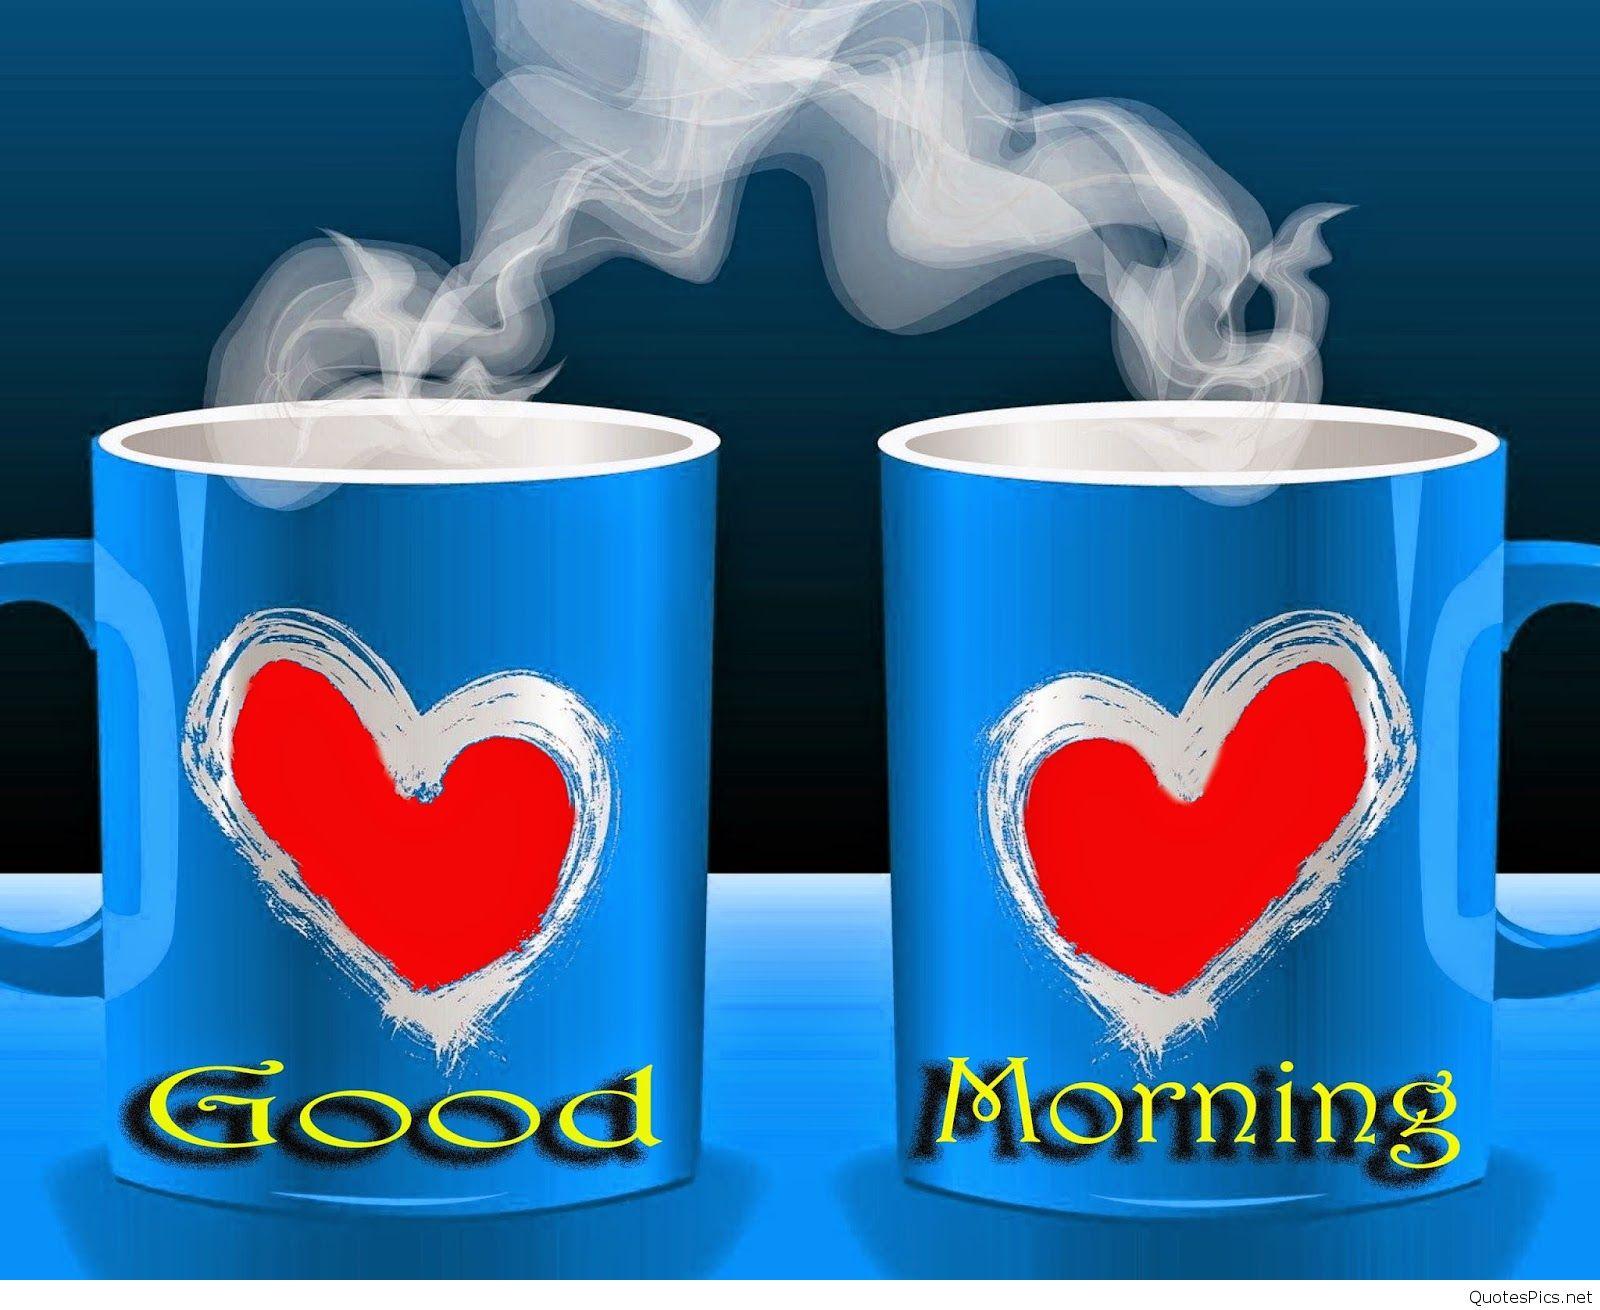 Love Good morning picture, cards, wallpaper 2016